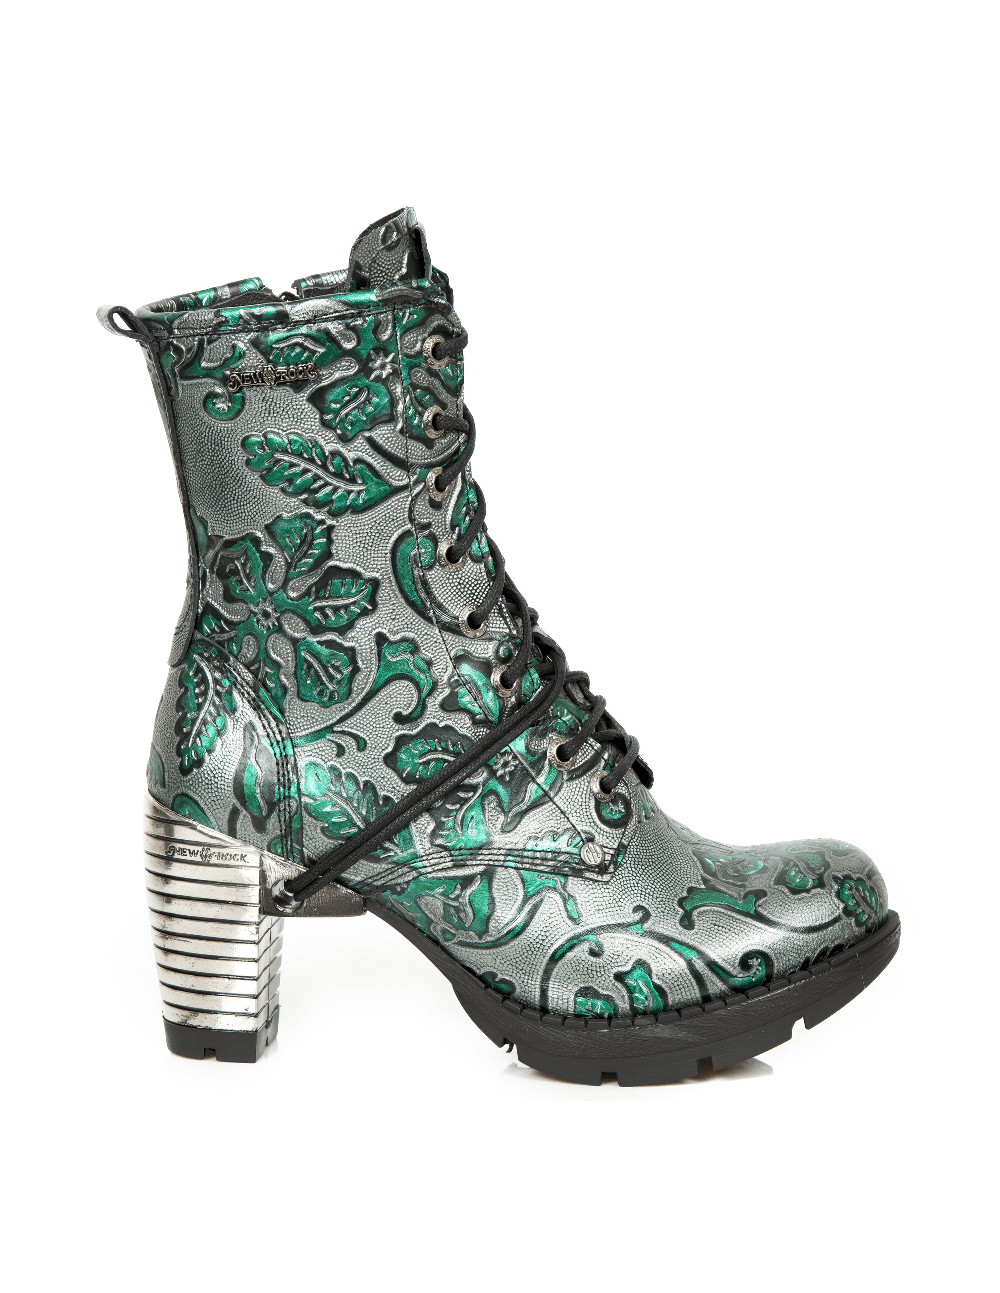 NEW ROCK Women's Embossed Leaf Pattern Lace-Up Ankle Boots